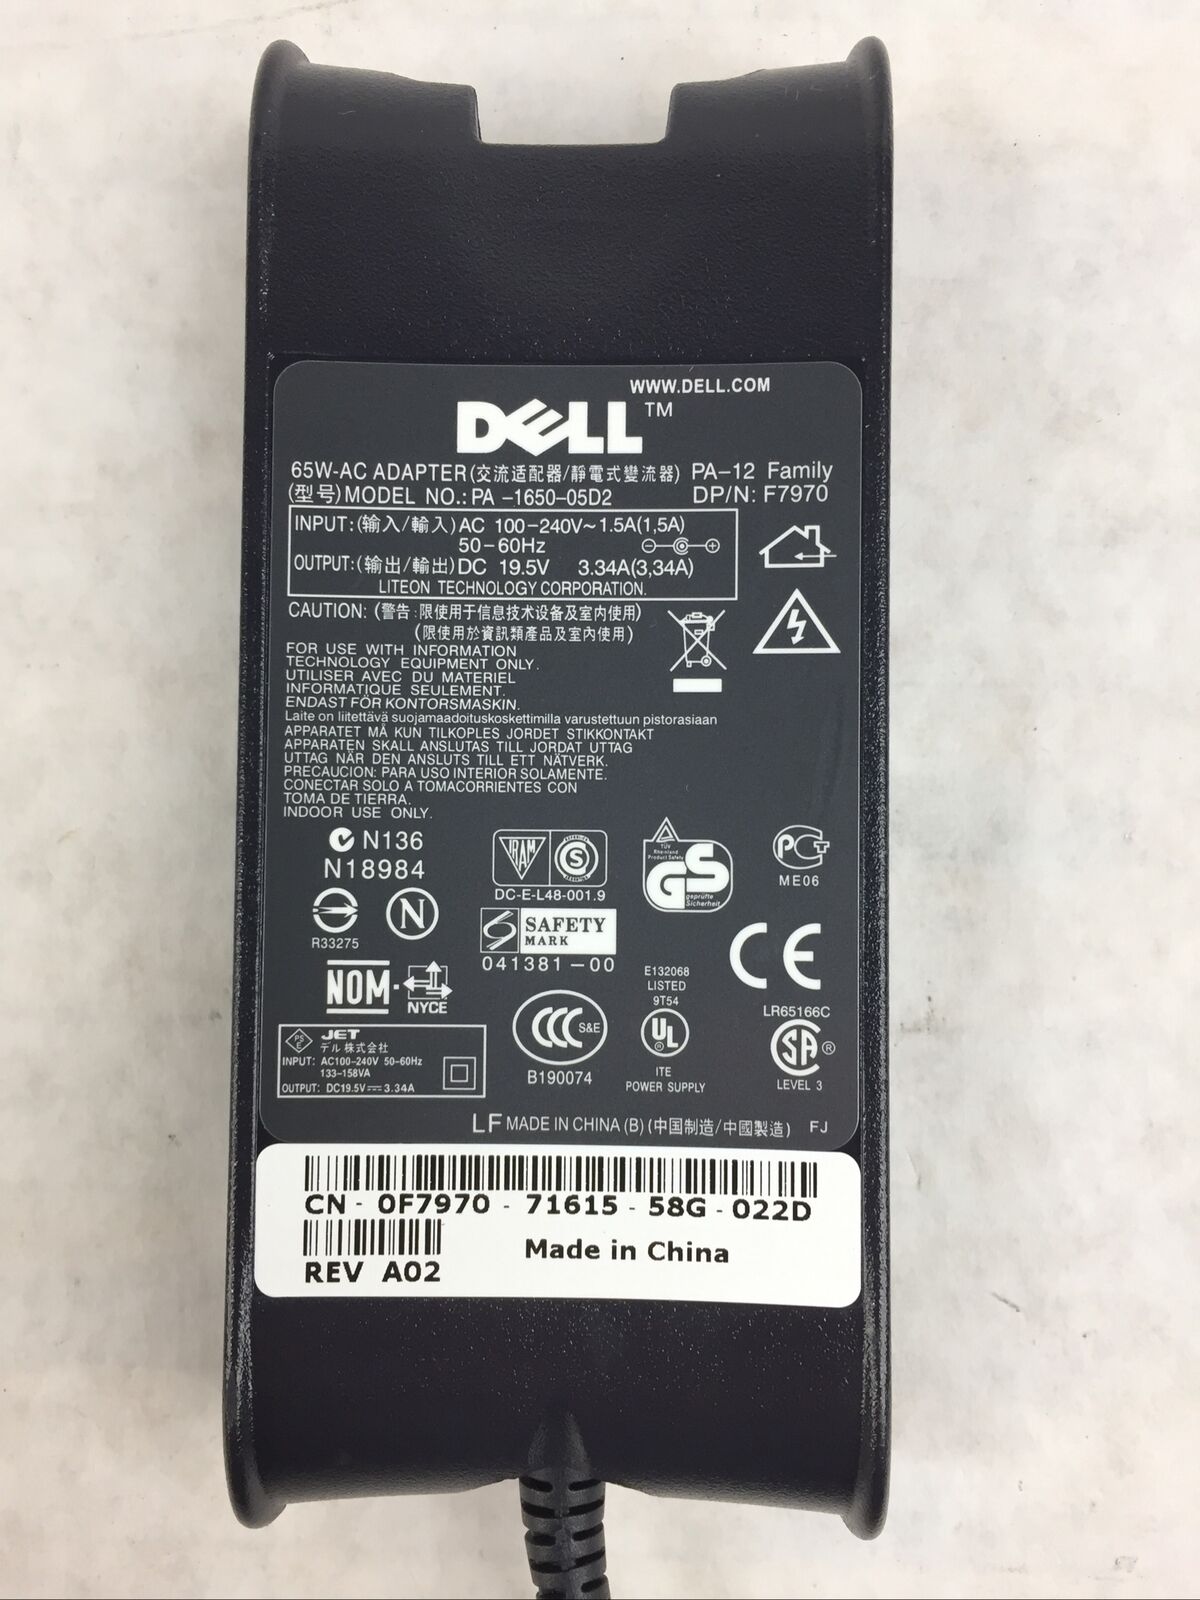 OEM Dell Adapter PA-1650-05D2 Laptop Power Adapter Charger